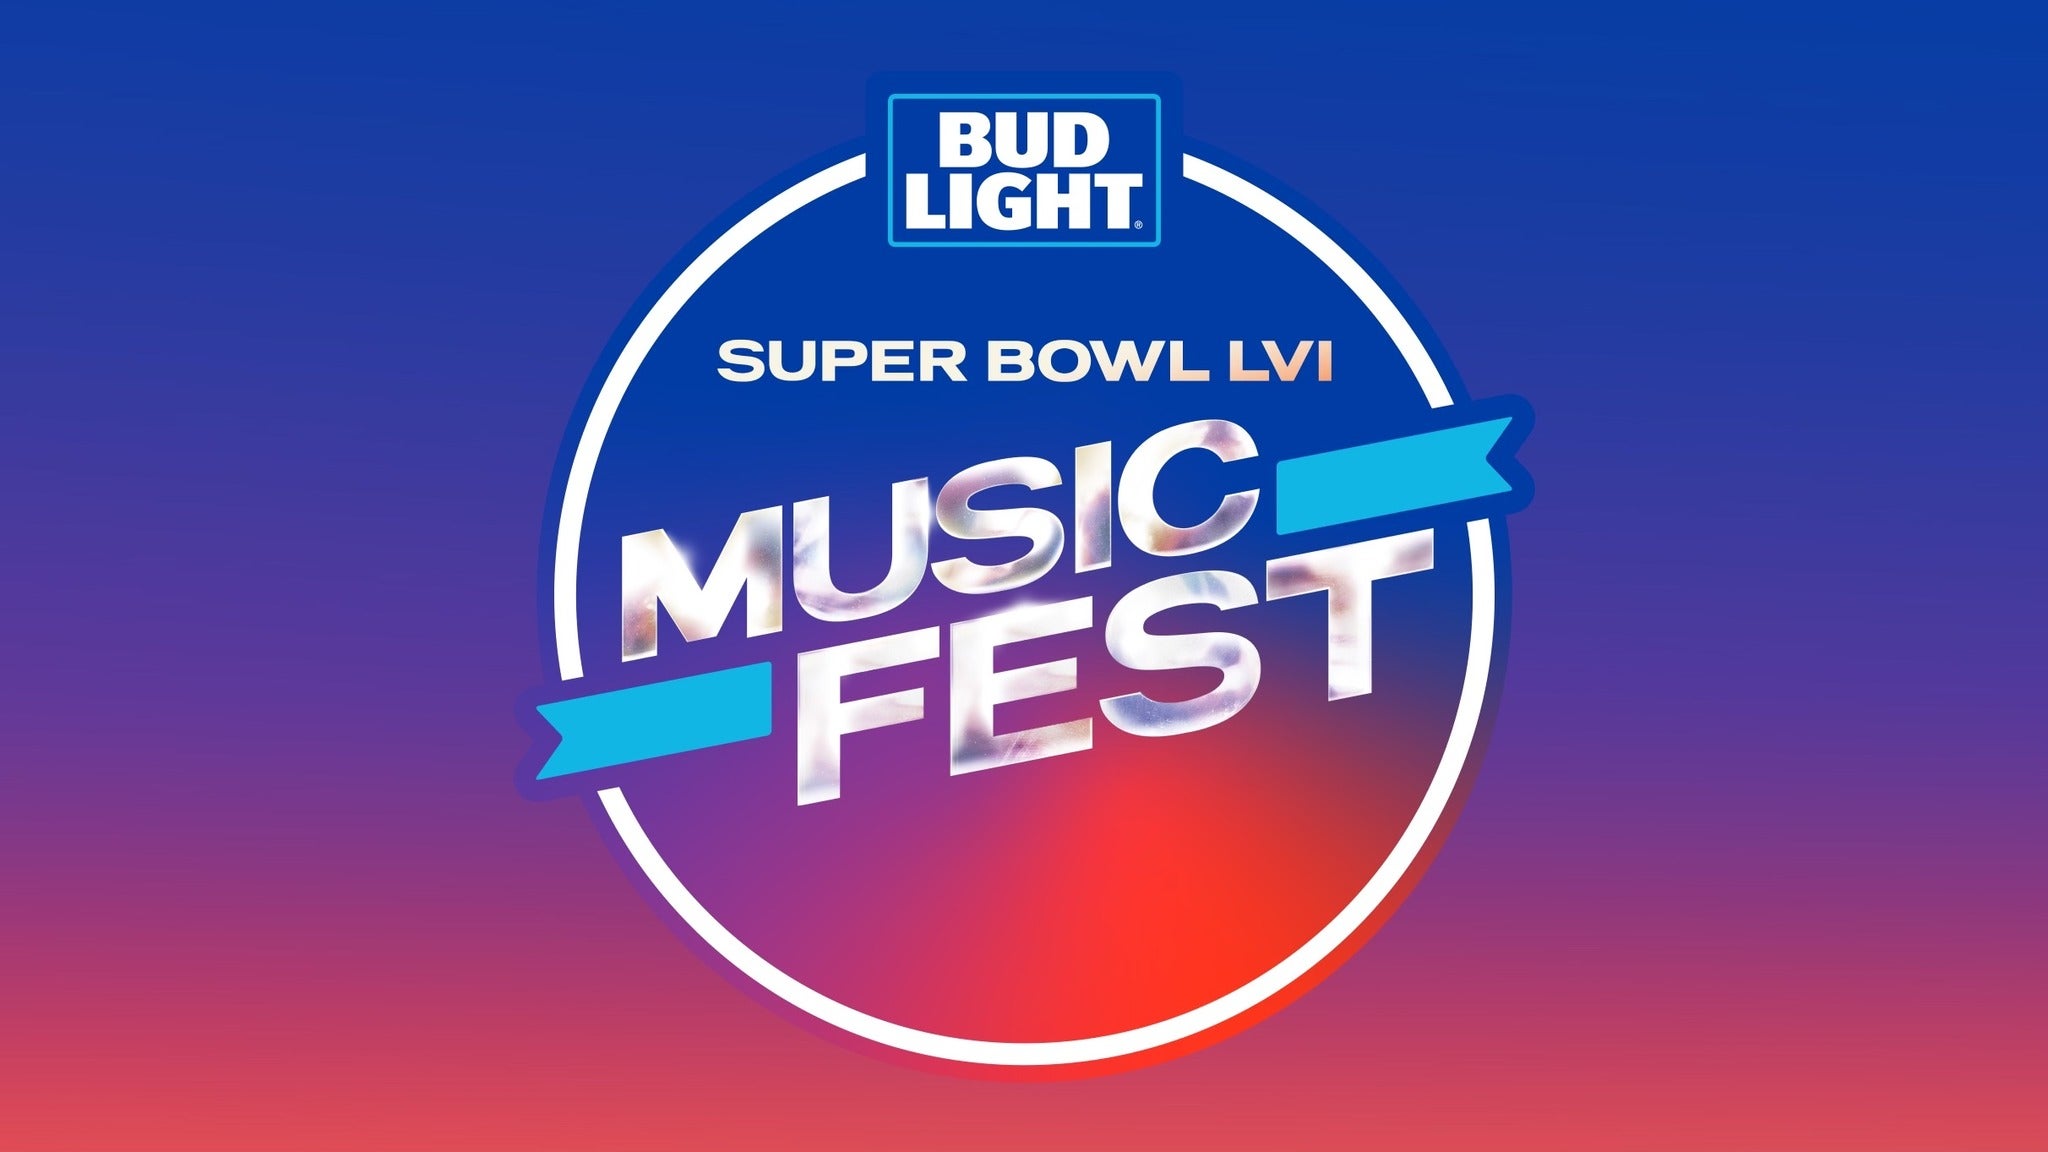 Bud Light Super Bowl Music Fest:  Green Day & Miley Cyrus in Los Angeles promo photo for 3 12pm presale offer code